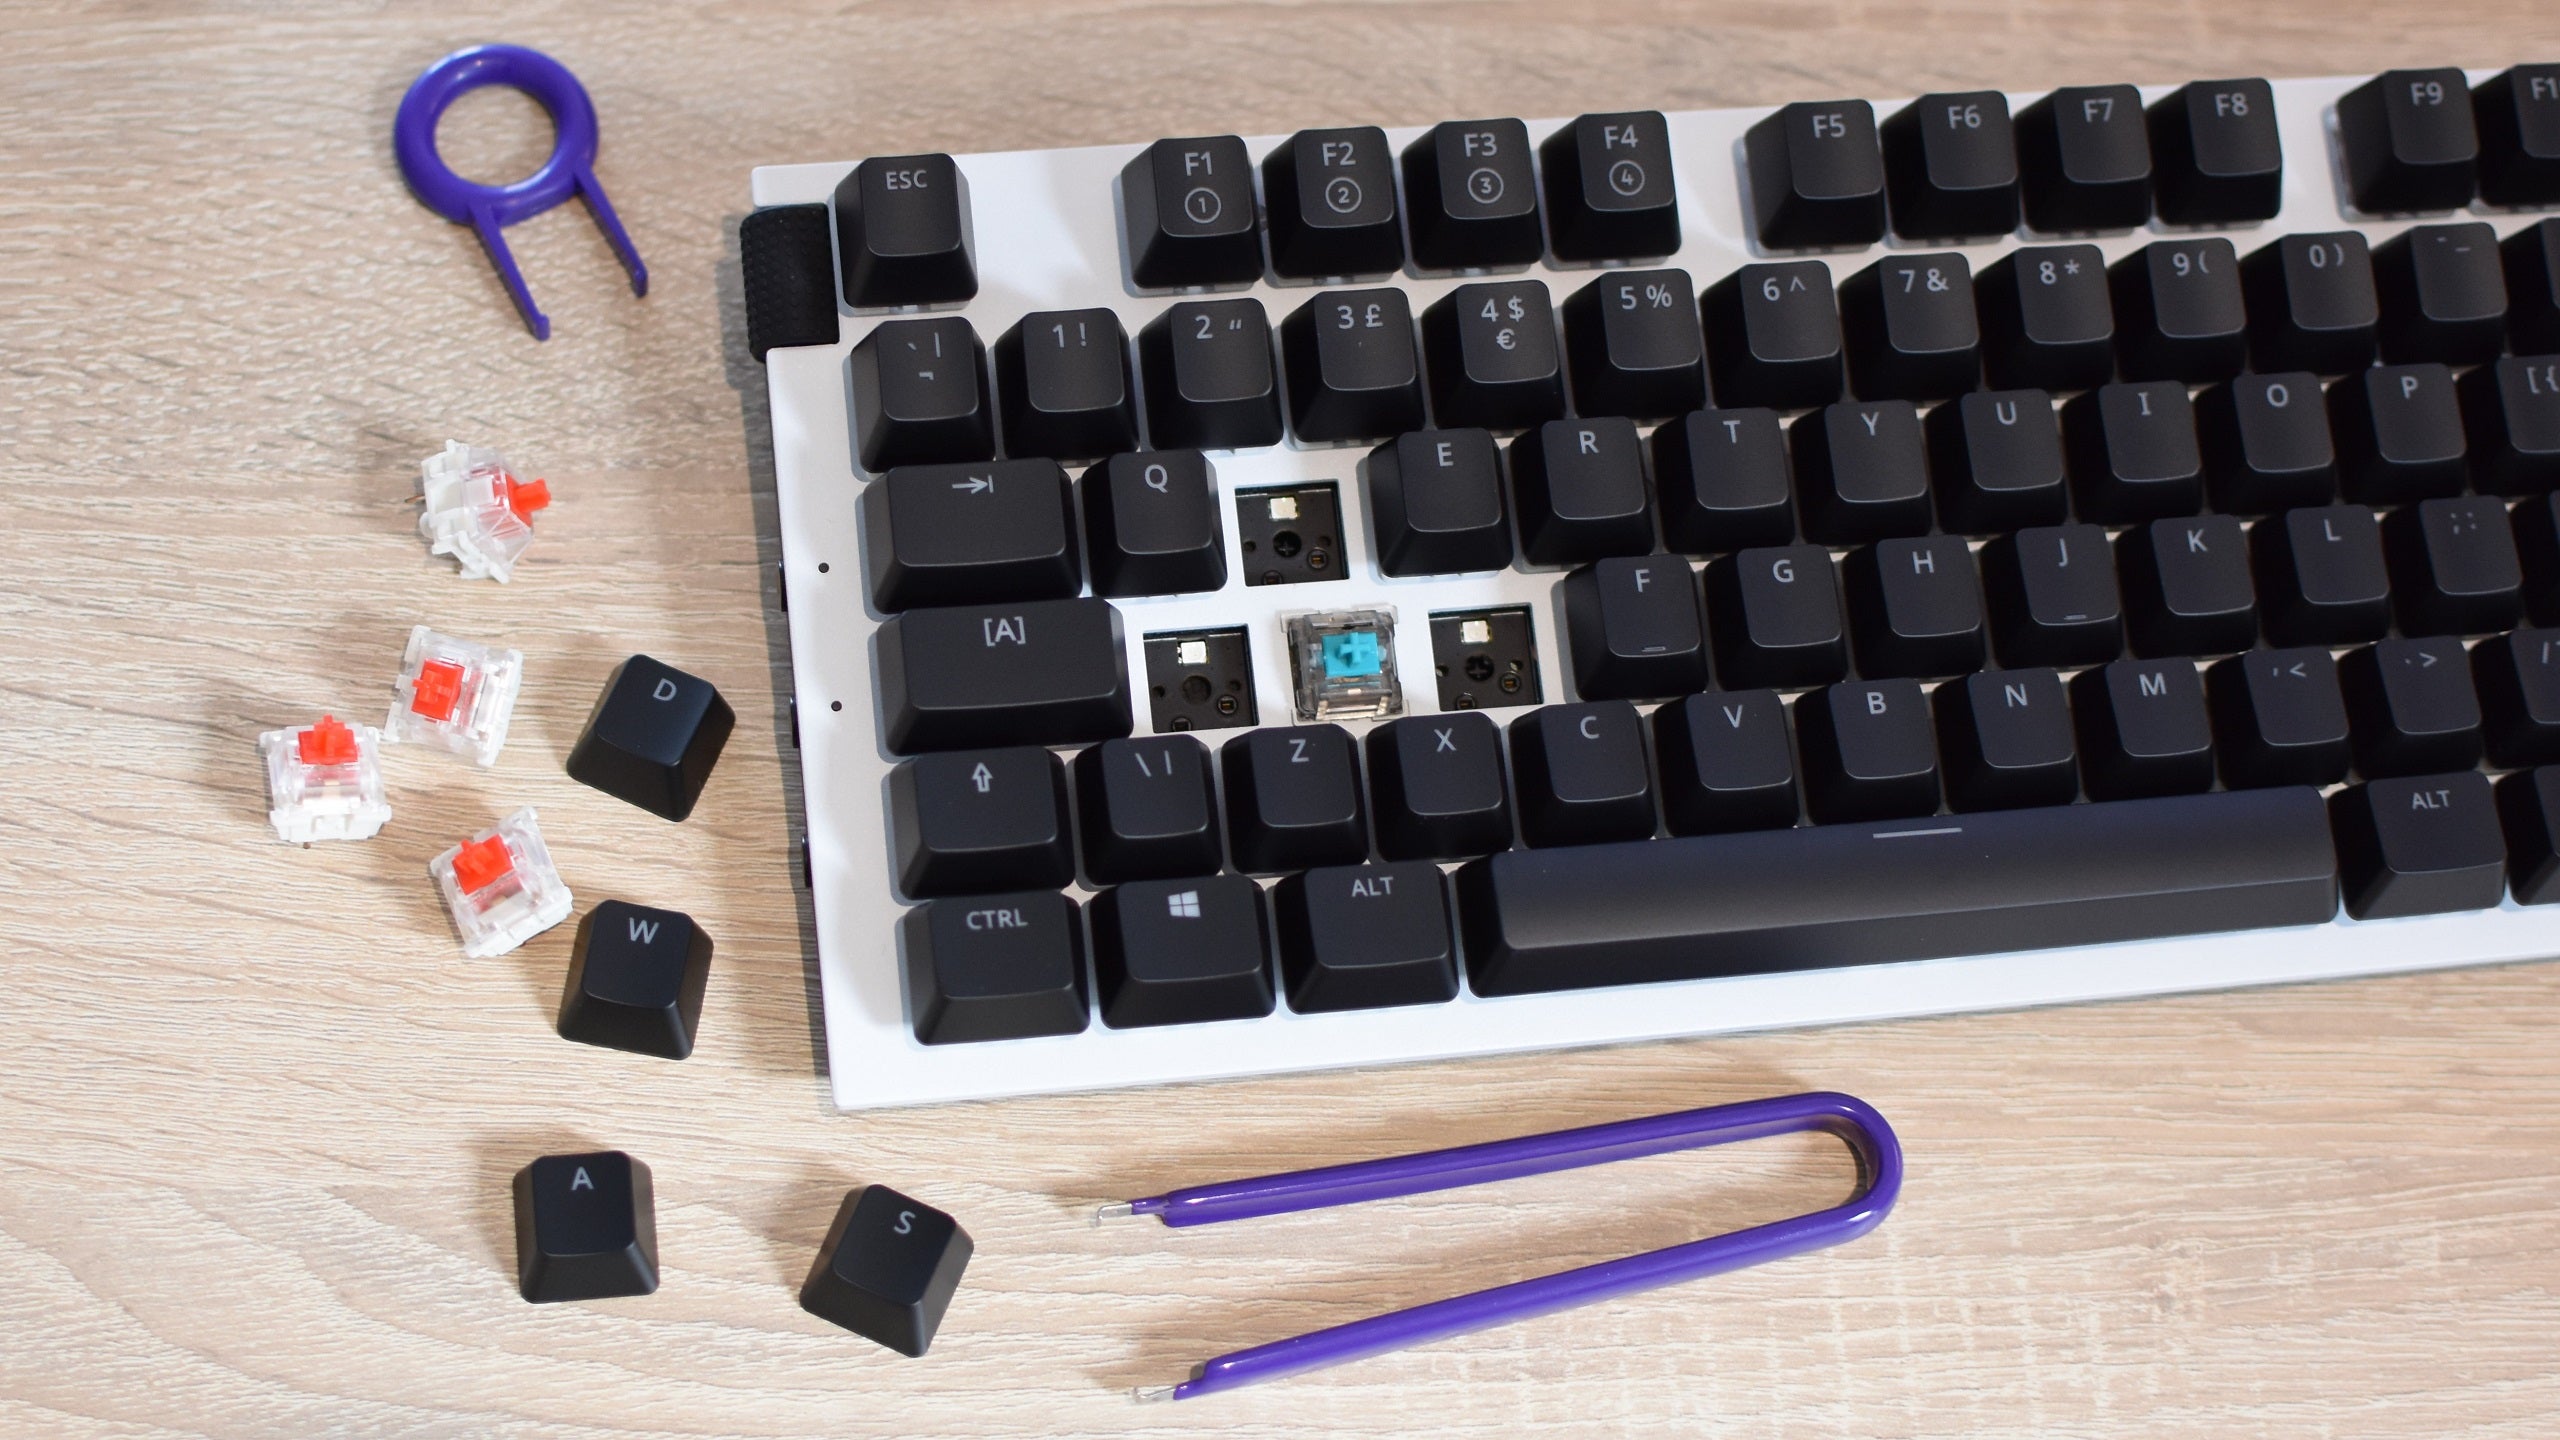 An NZXT Function gaming keyboard being hot-swapped its WASD key switches.  Several removed keys and switches can be found next to the keyboard, next to some tools.